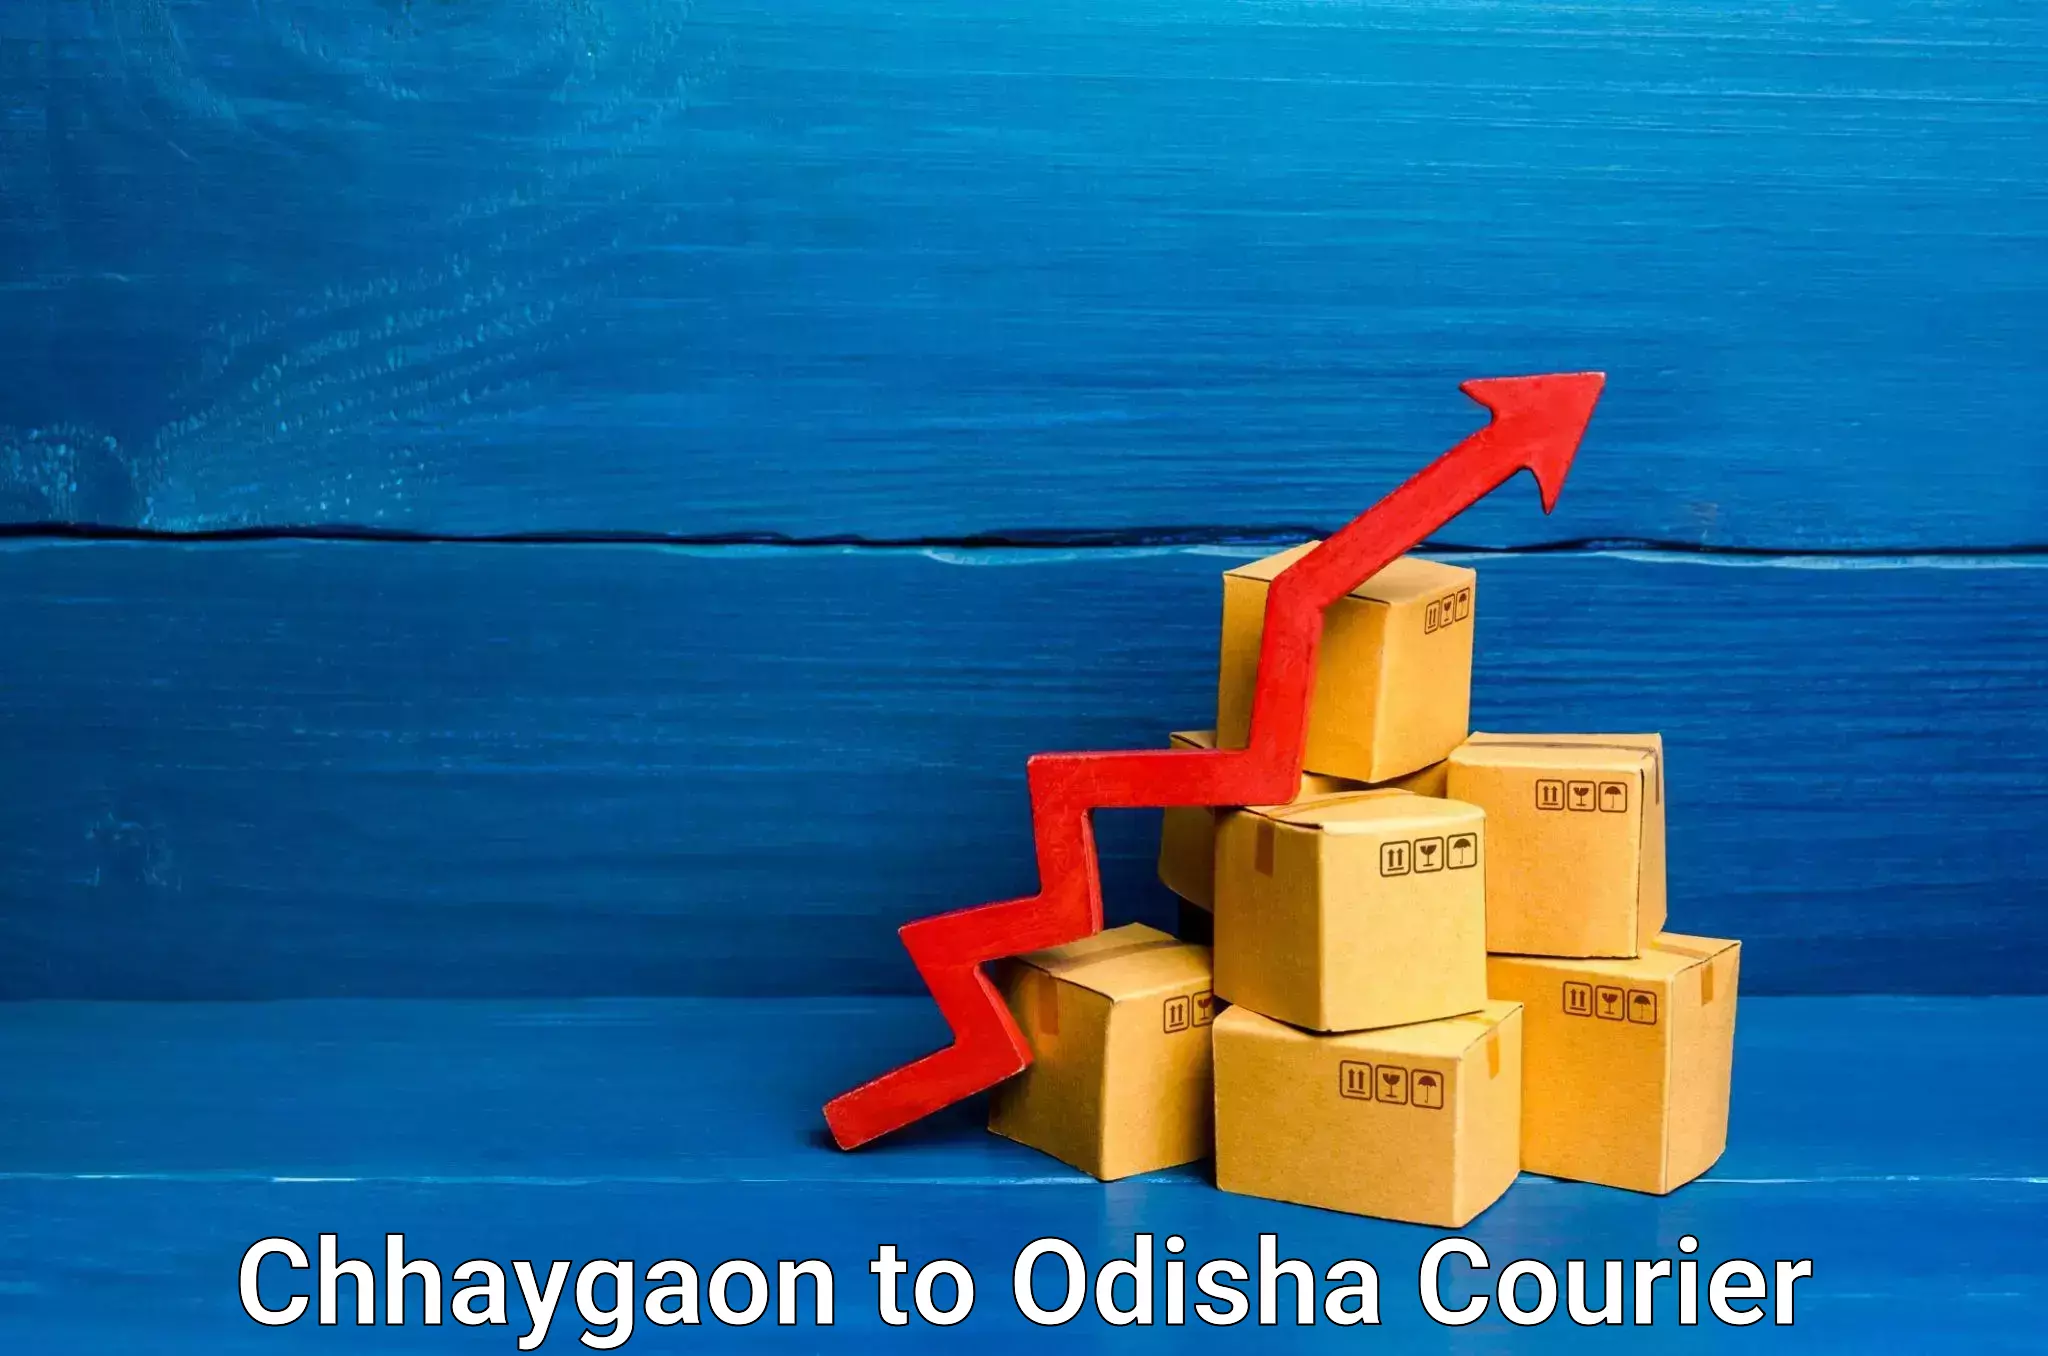 Reliable parcel services in Chhaygaon to Agarpada